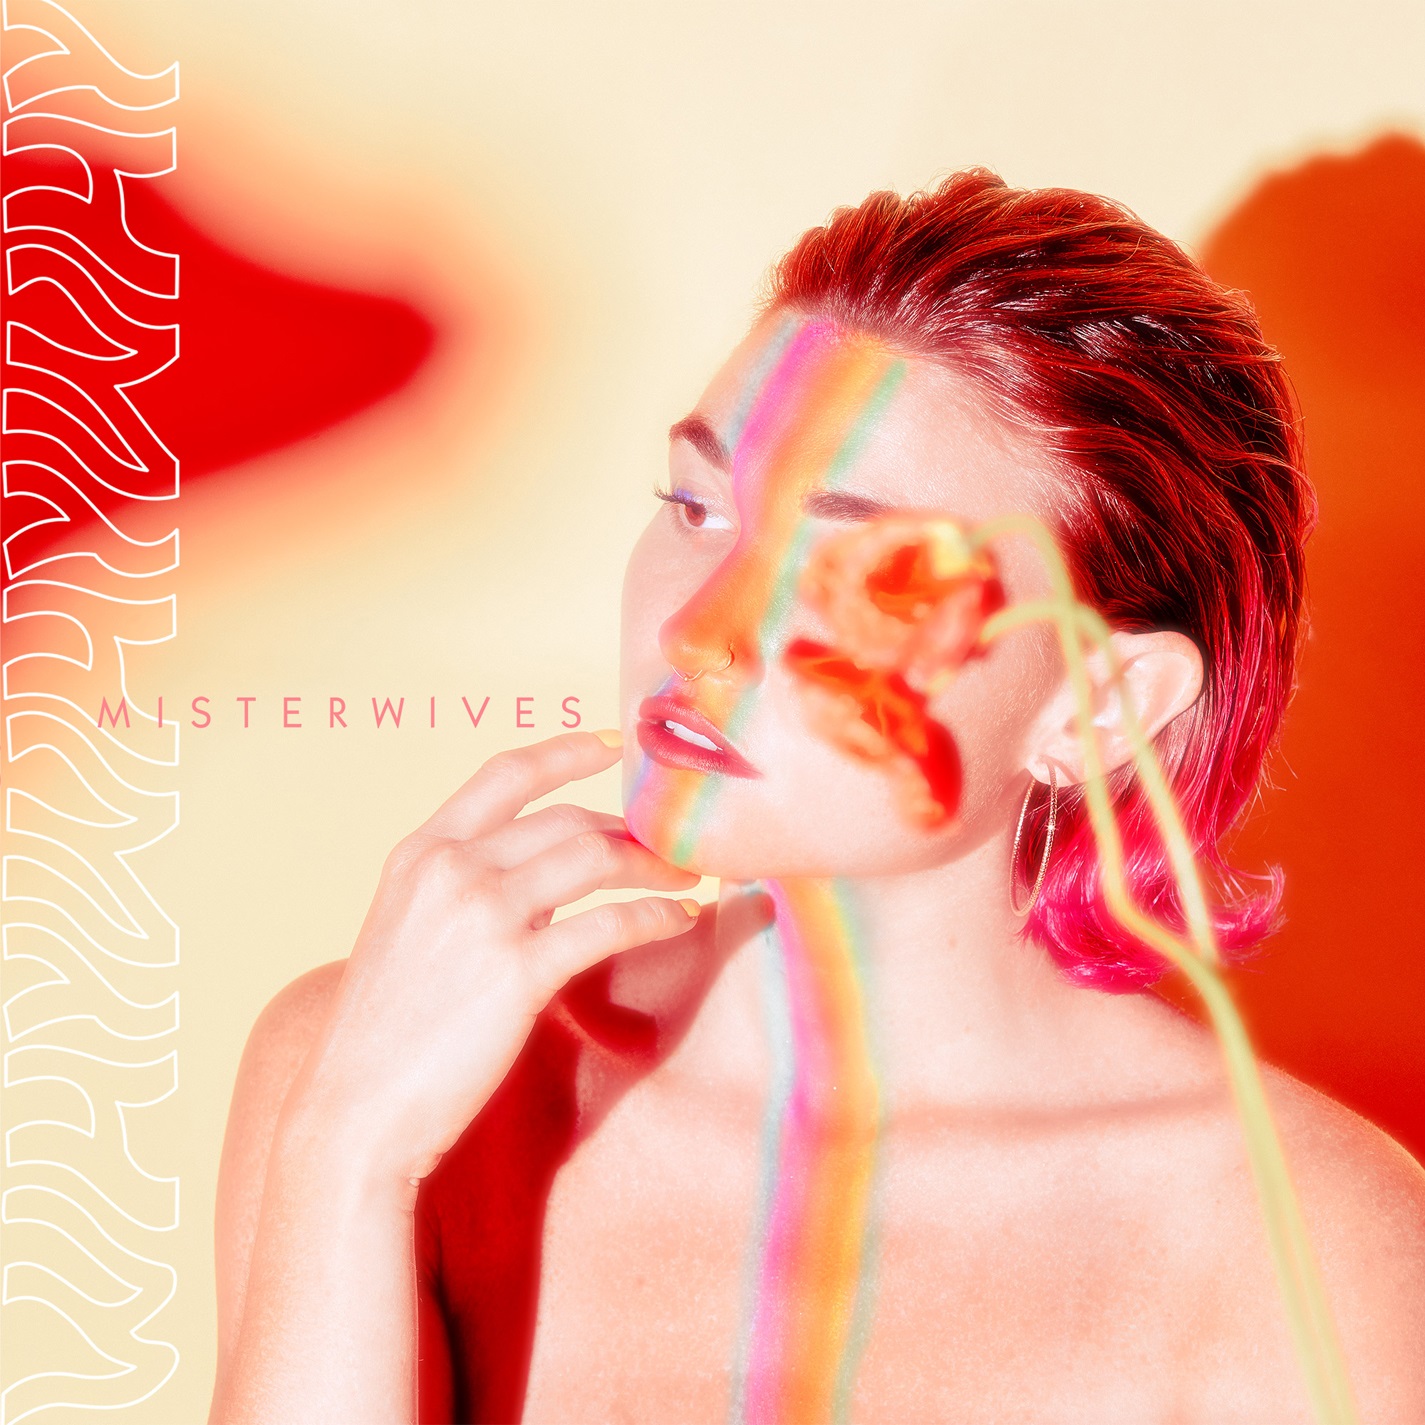 Misterwives – whywhywhy